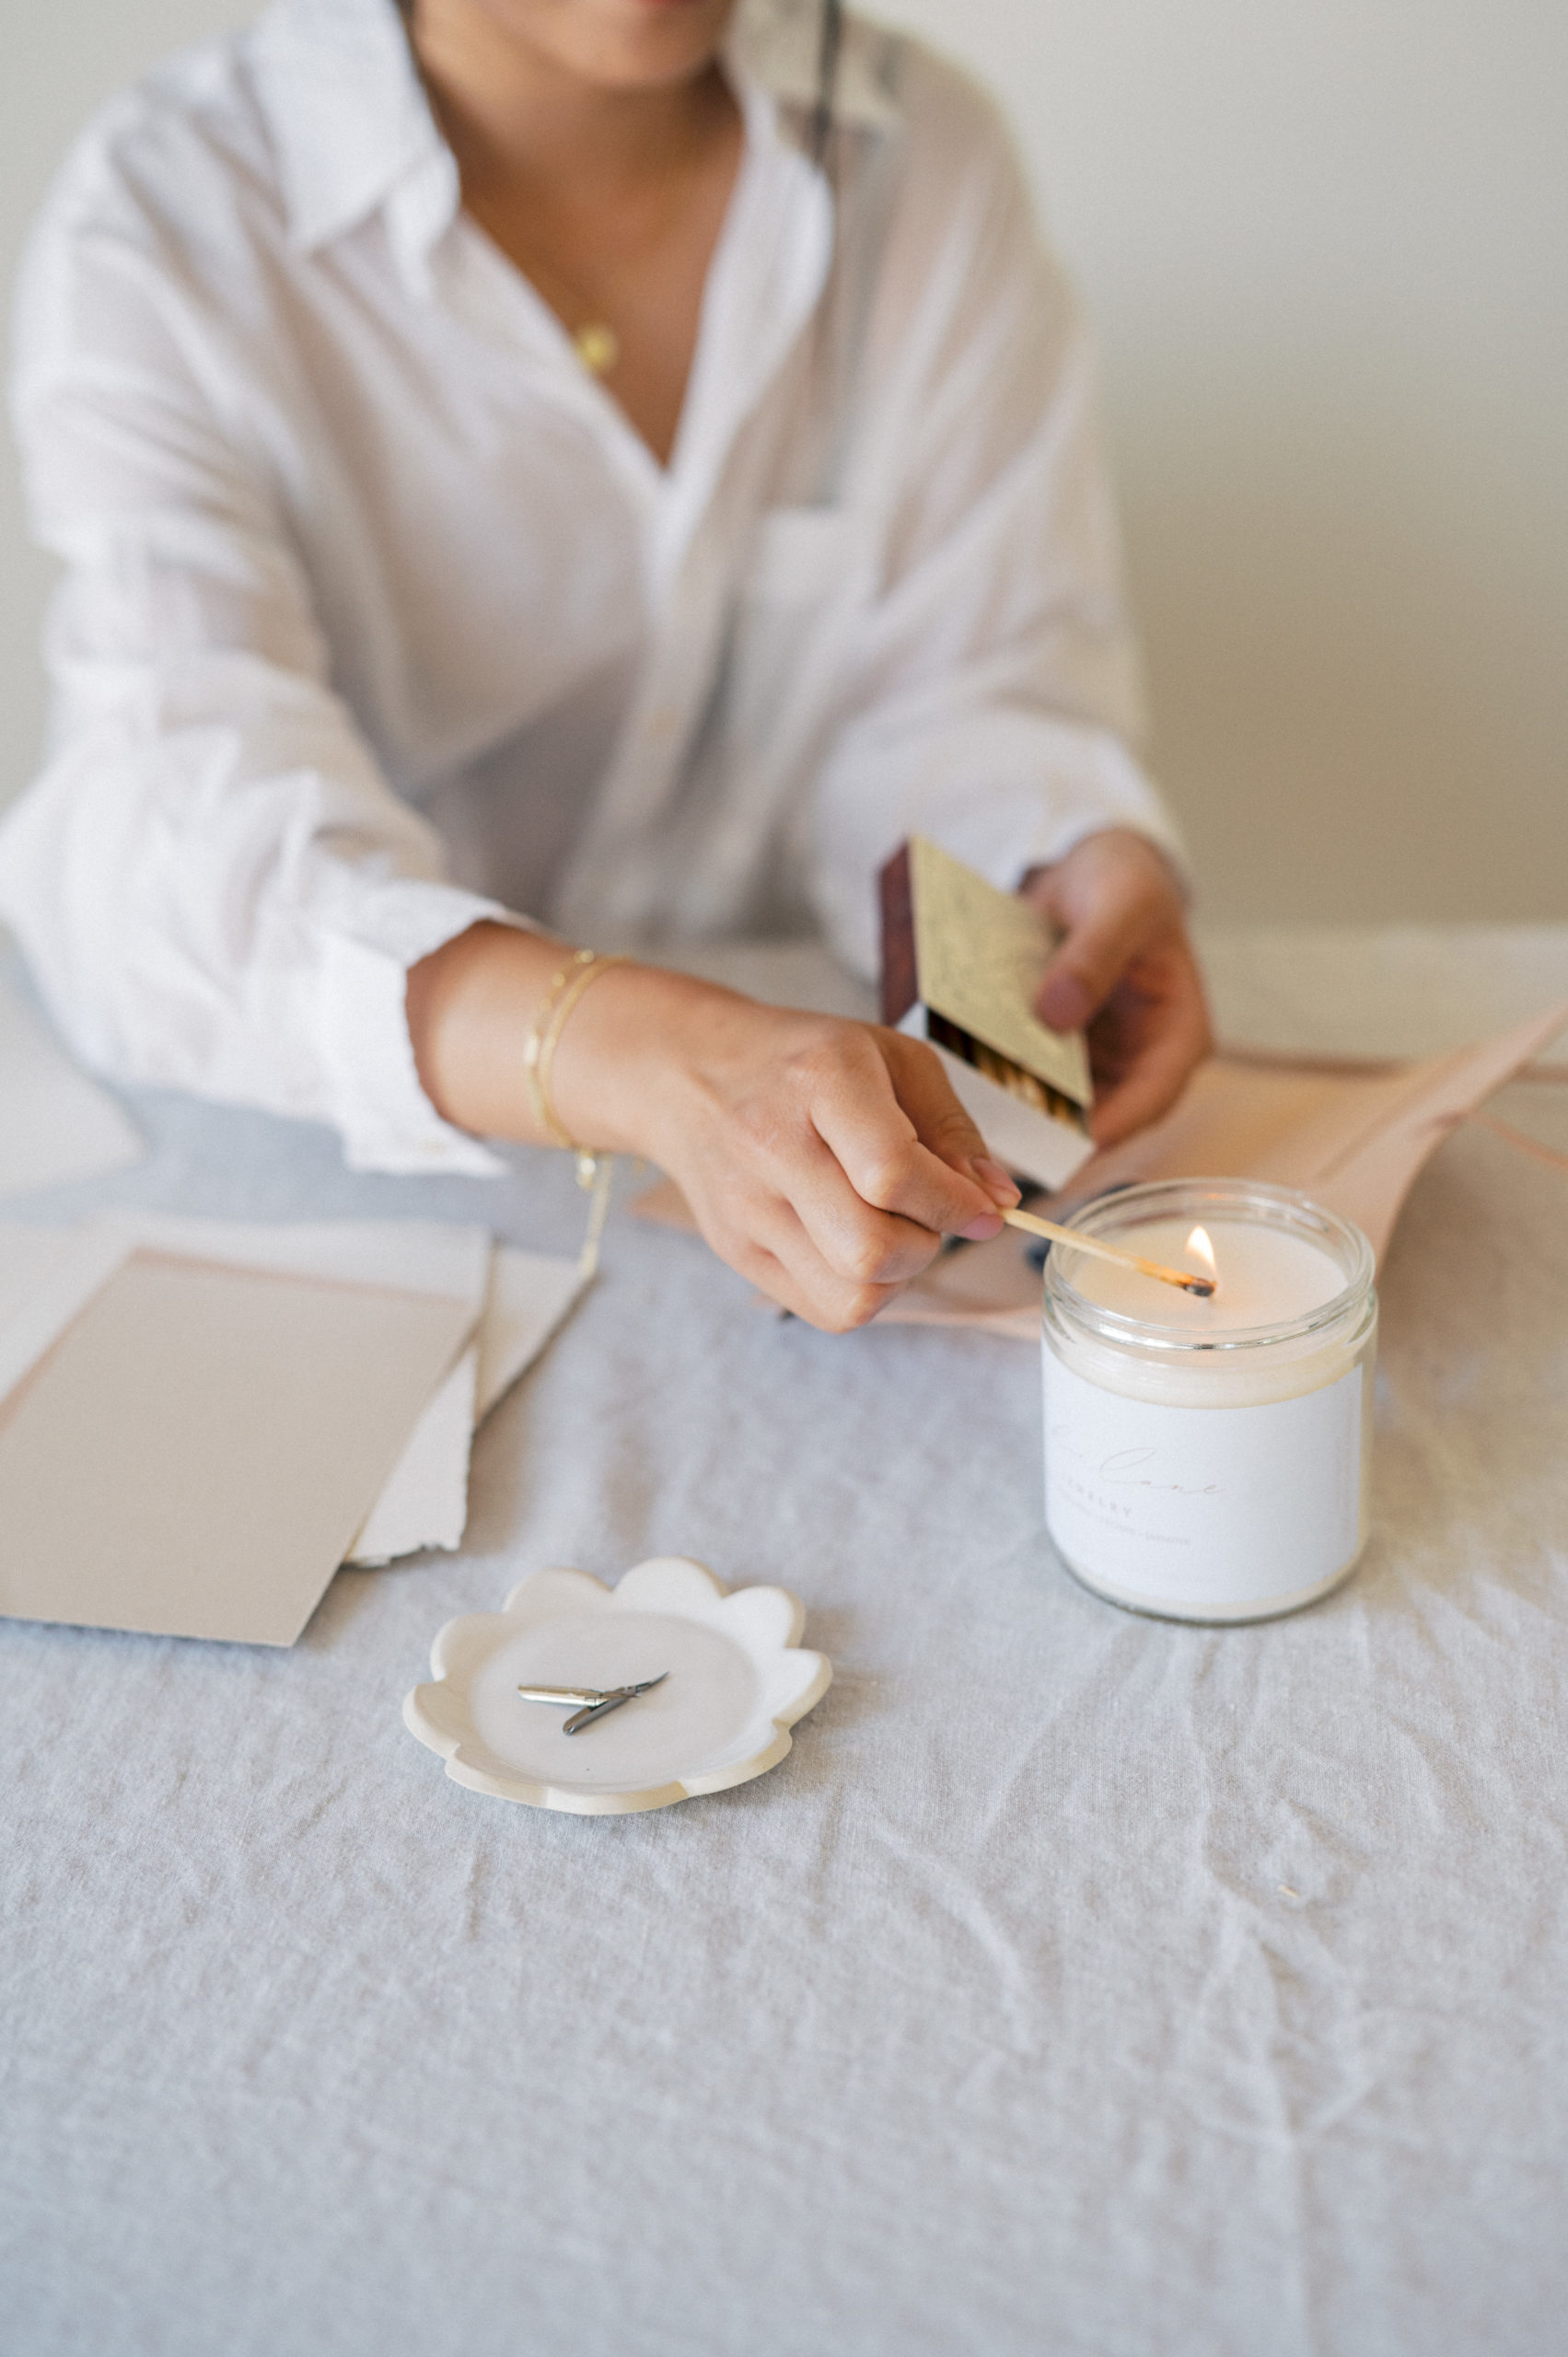 Upclose of woman wearing white button up shirt lighting a white candle on a linen covered table